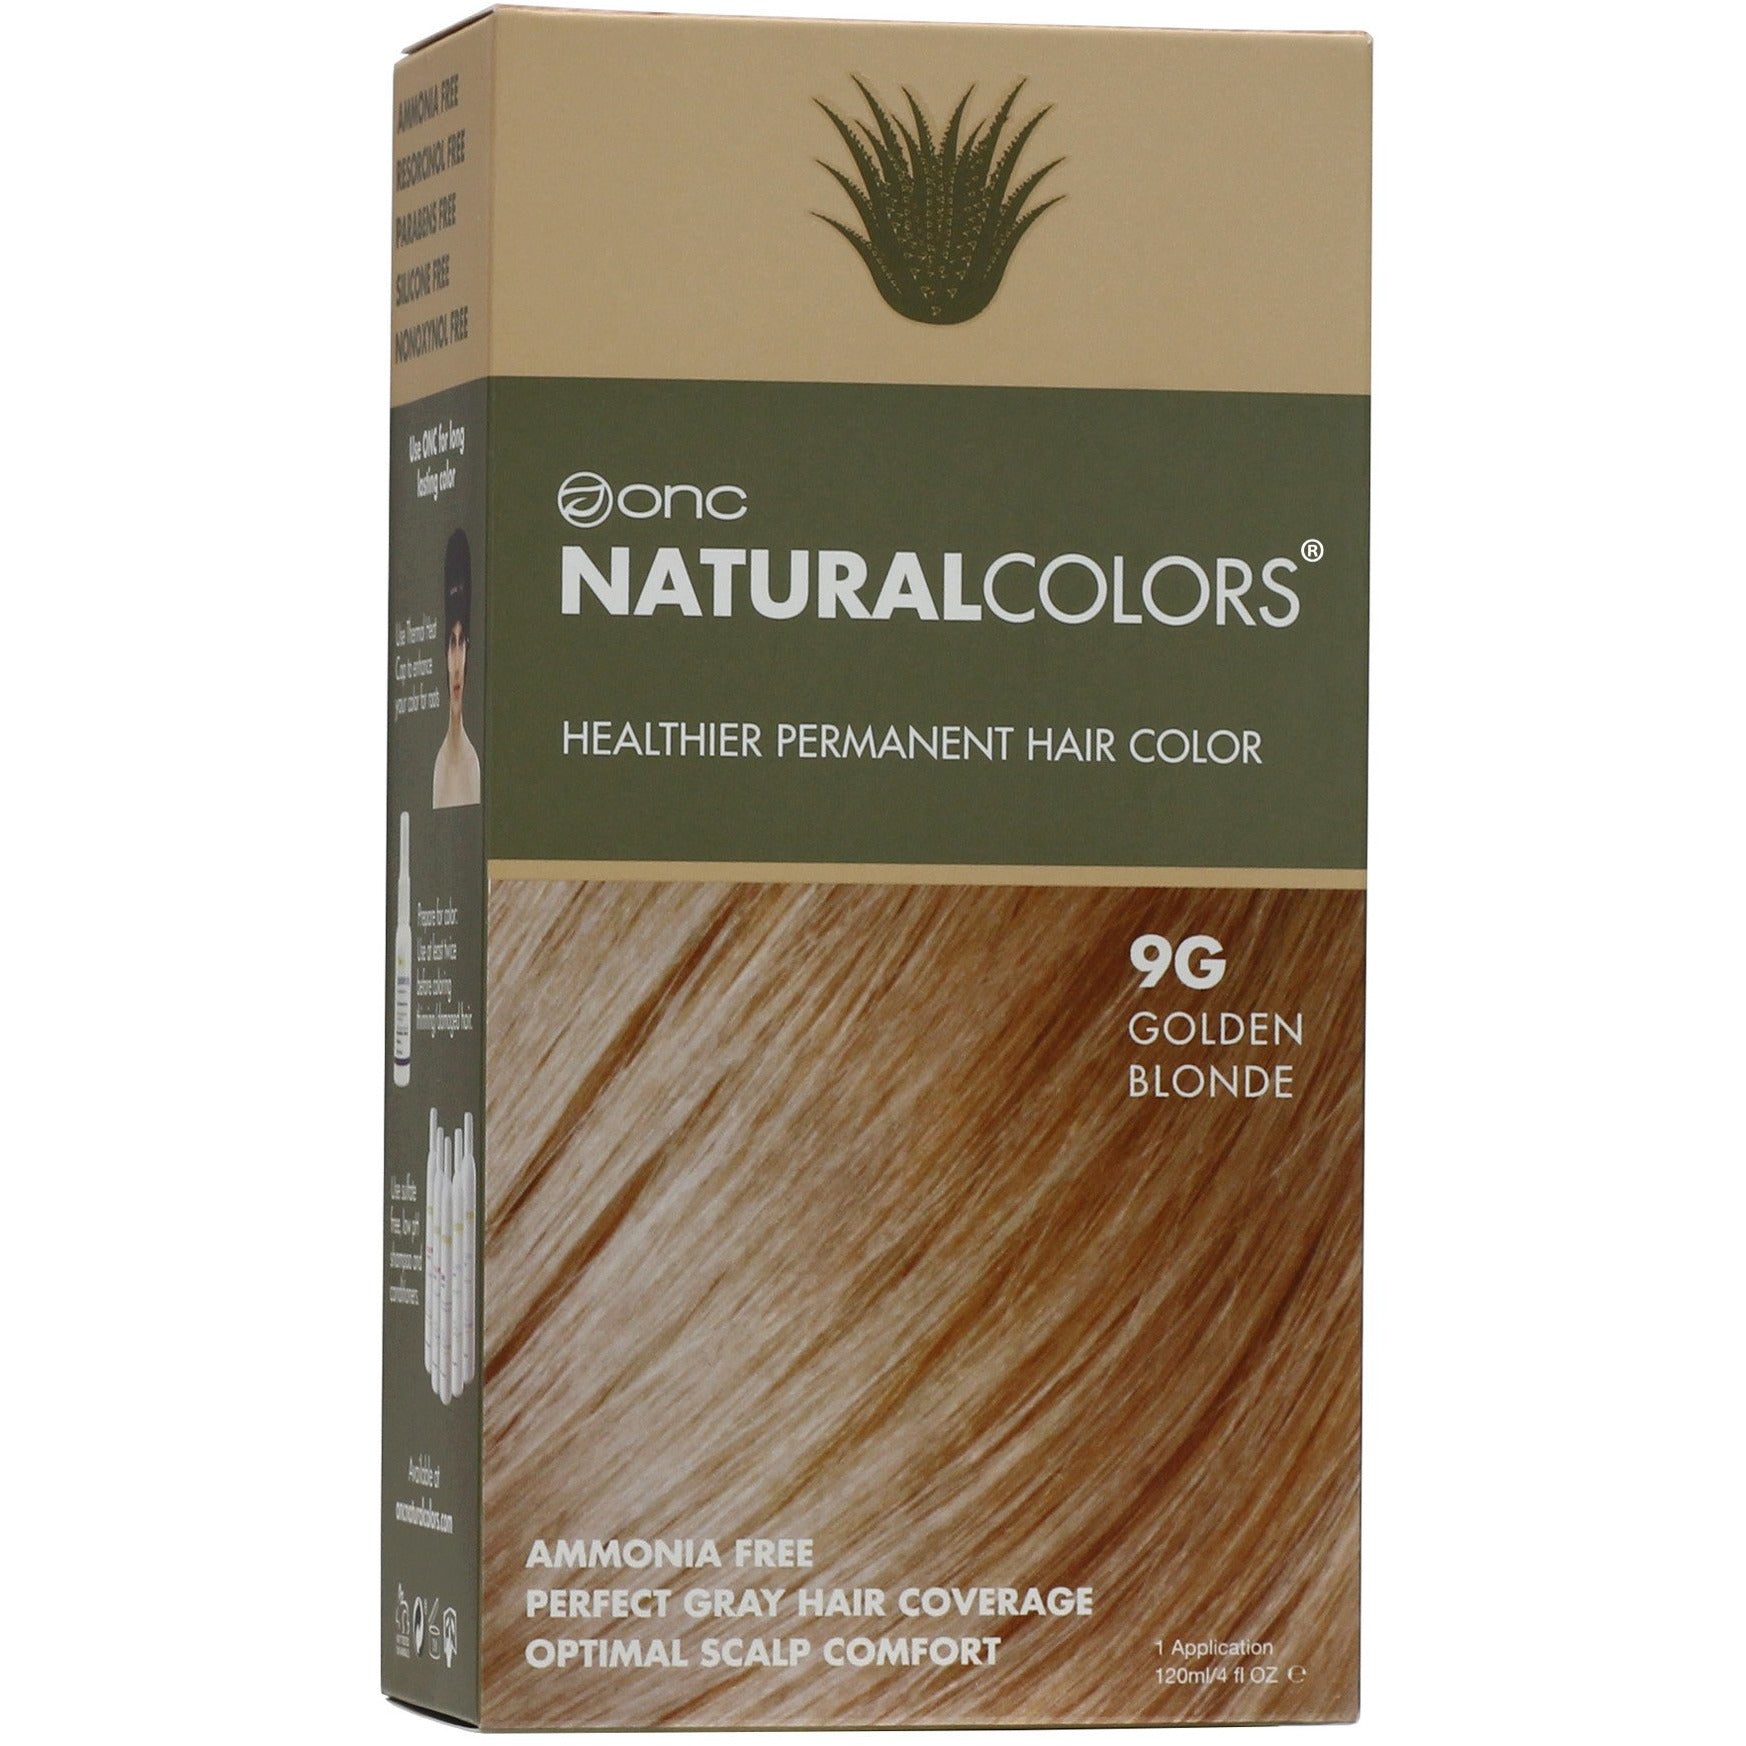 ONC NATURALCOLORS 9G Golden Blonde Hair Dye With Organic Ingredients 120 mL / 4 fl. oz.